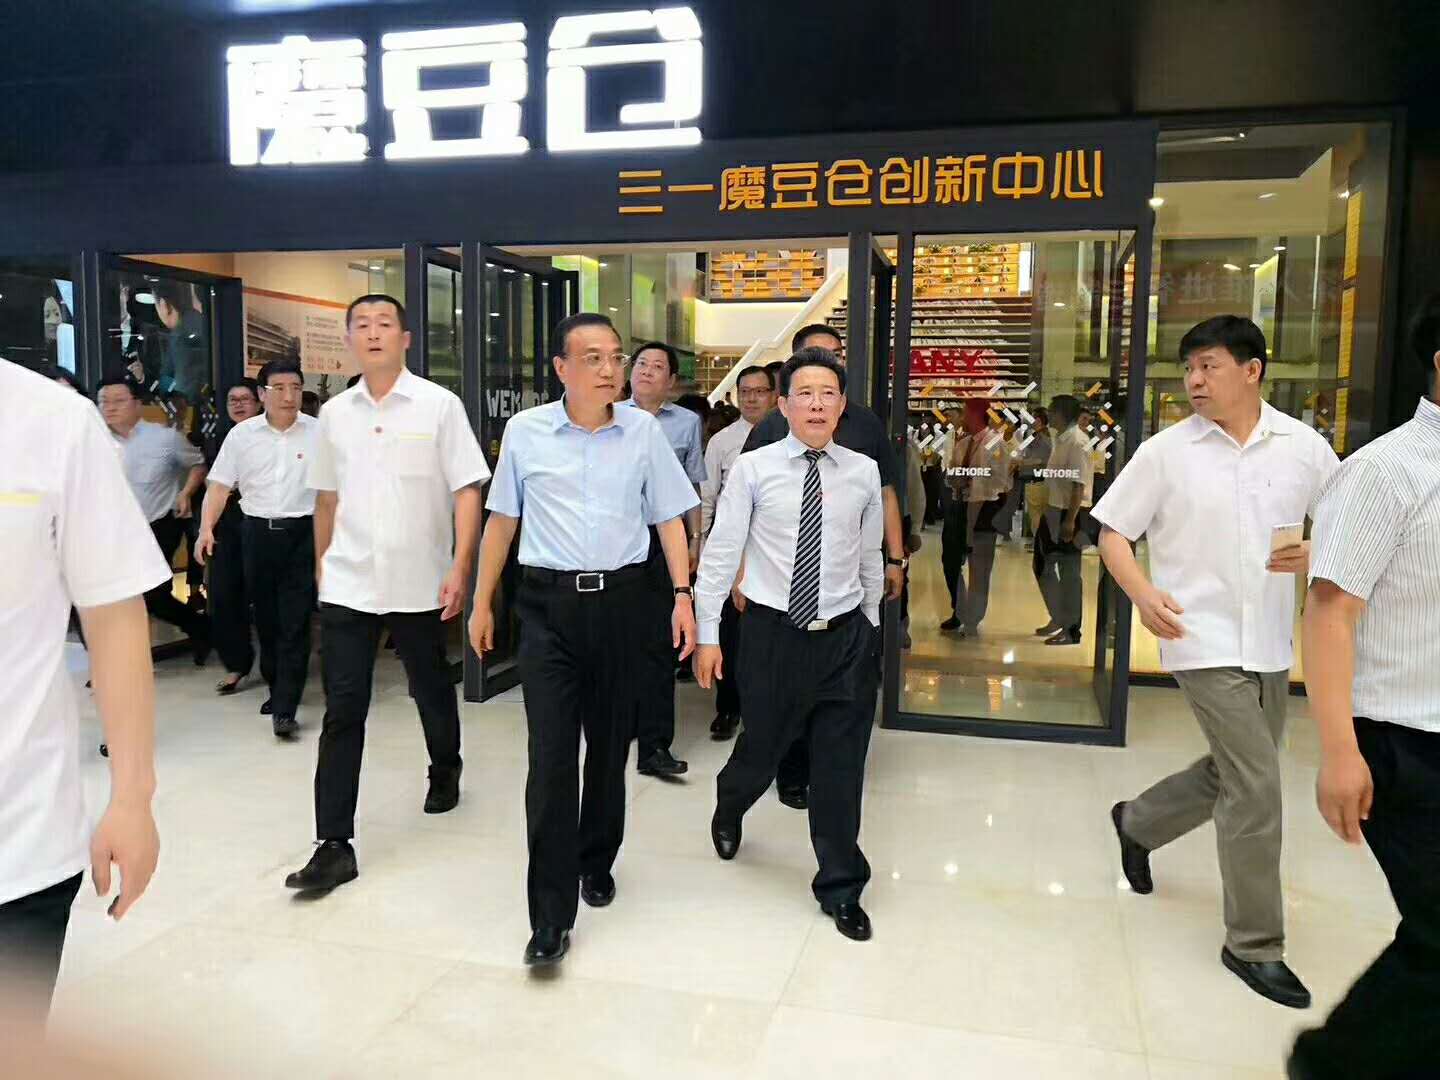 Warmly welcome Prime Minister-Mr. Keqiang Lee’s visit to CSCERAMIC office building .